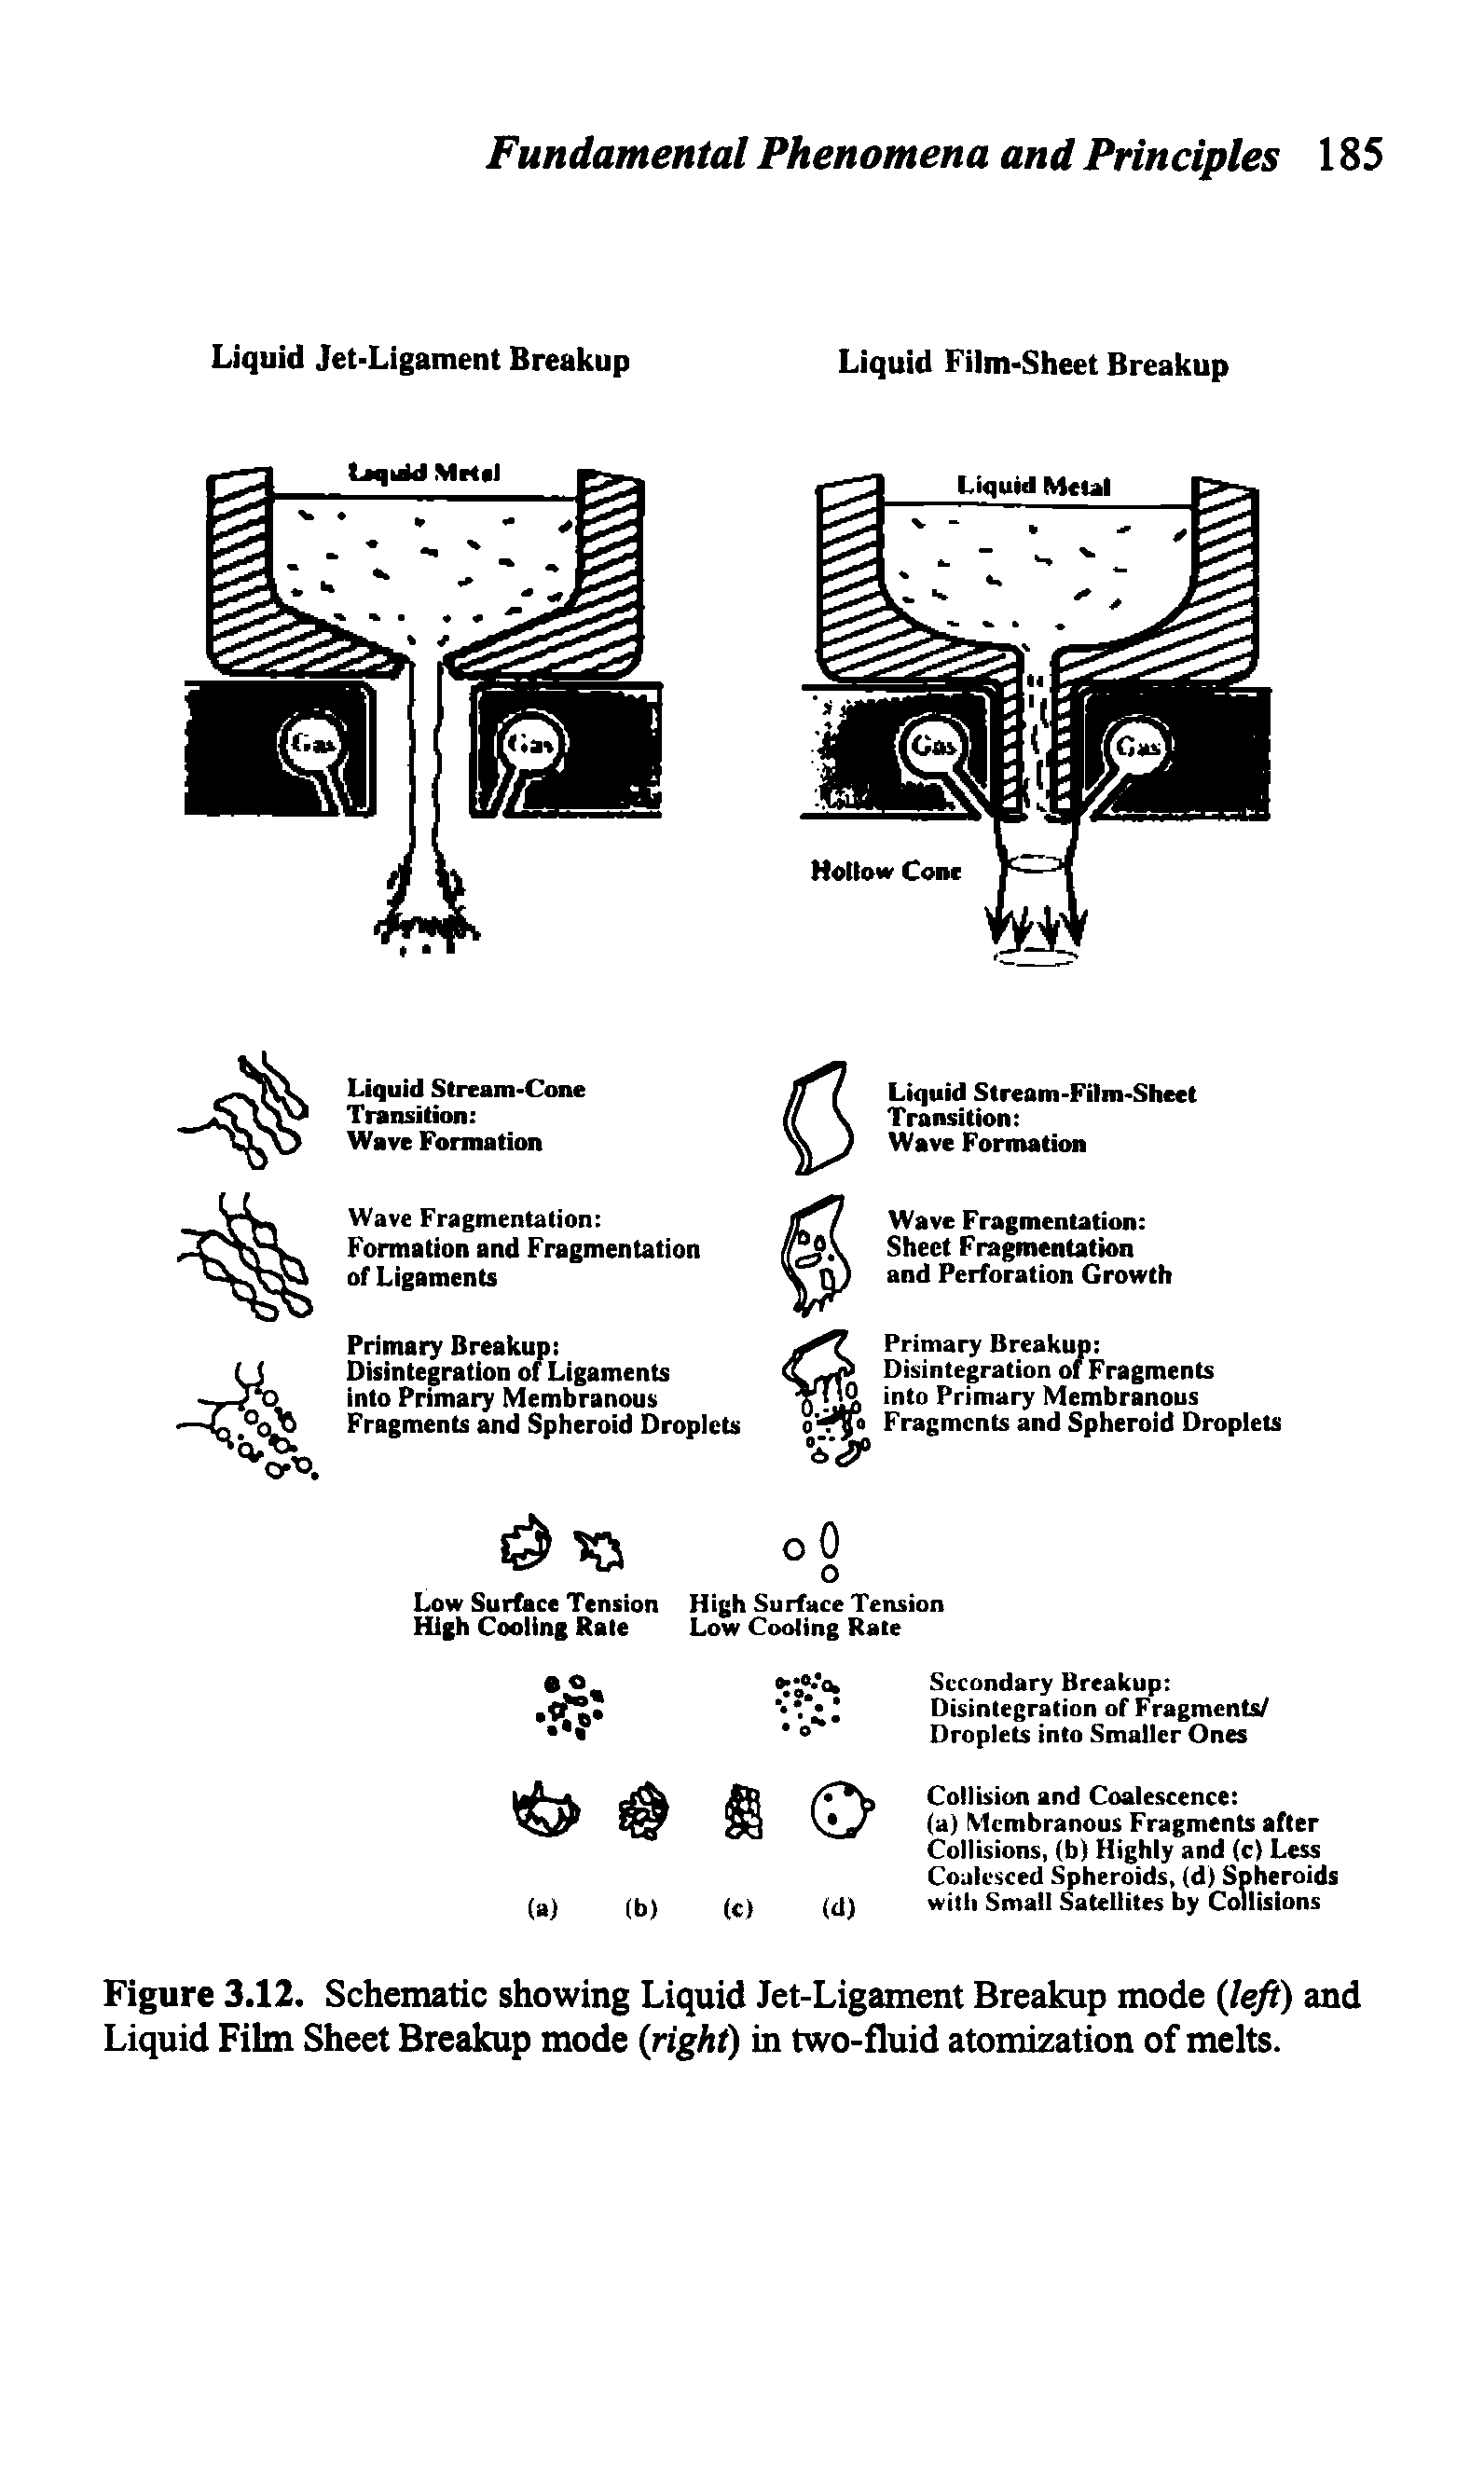 Figure 3.12. Schematic showing Liquid Jet-Ligament Breakup mode (left) and Liquid Film Sheet Breakup mode (right) in two-fluid atomization of melts.